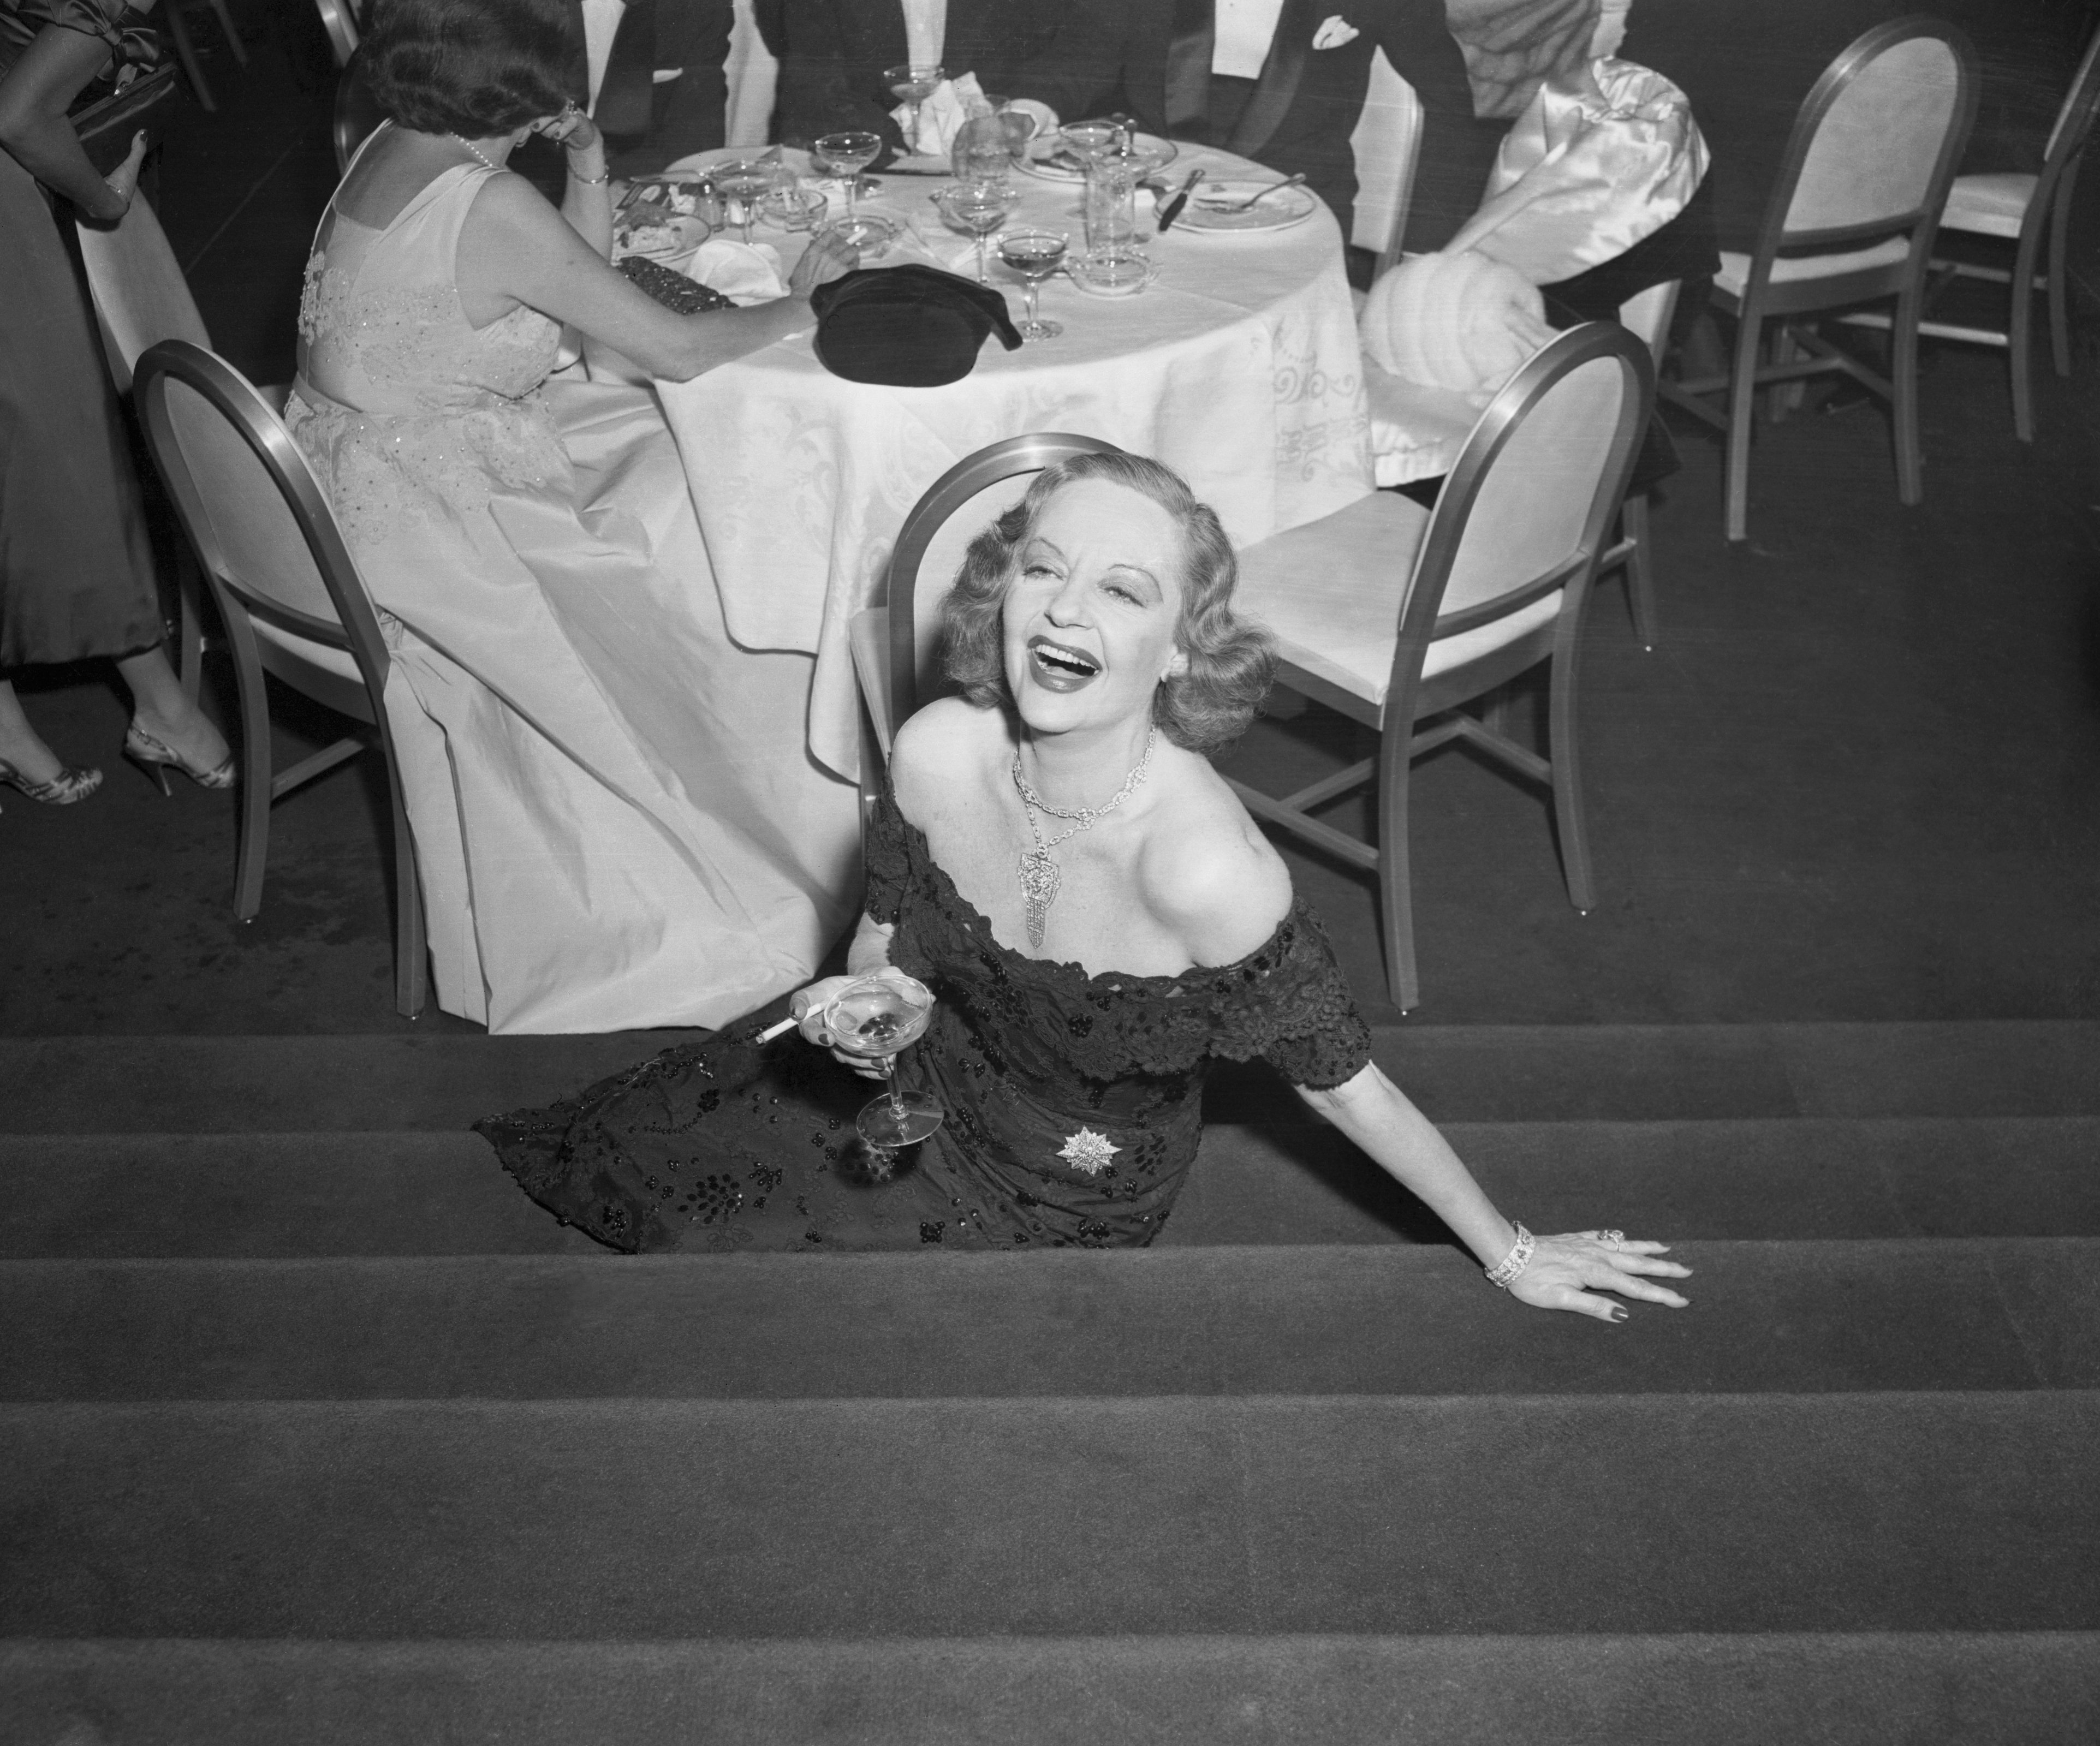 Tallulah Bankhead pictured at Hotel Ambassador in New York circa 1954 | Source: Getty Images